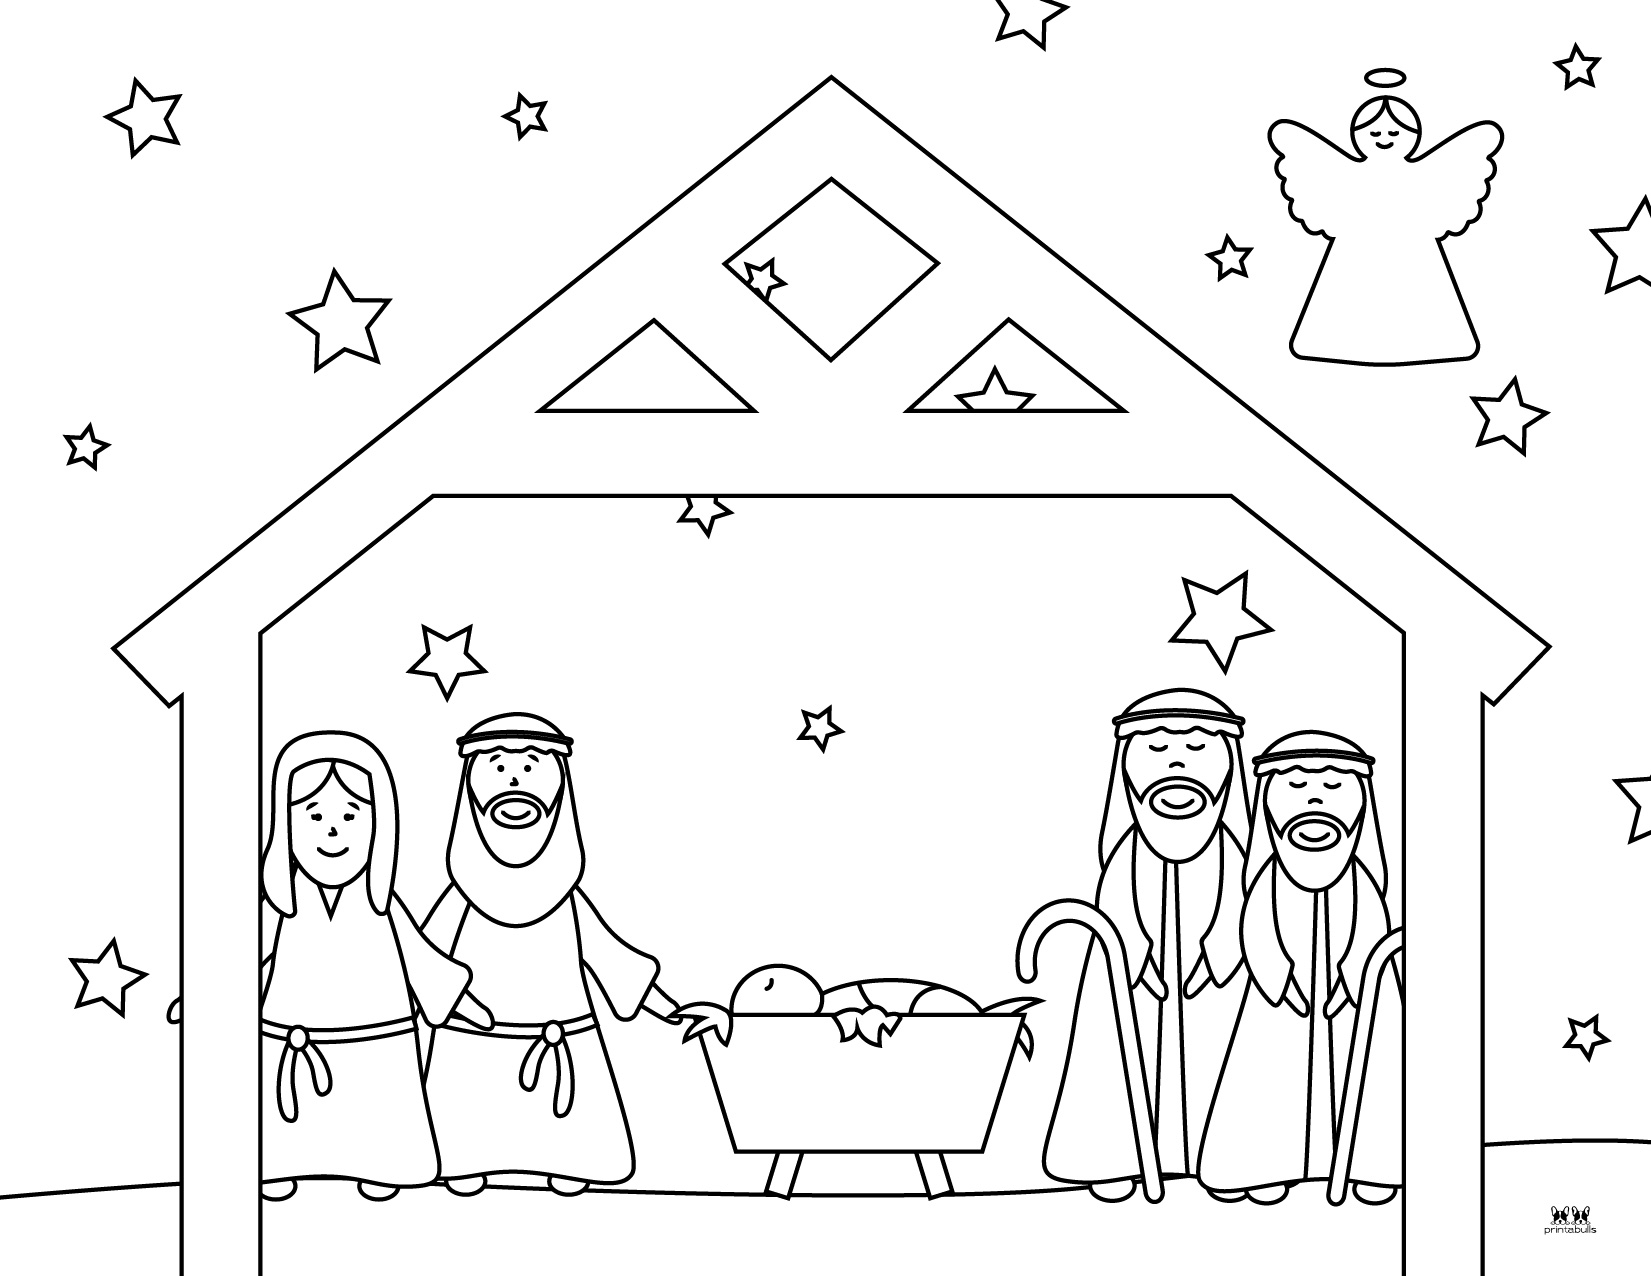 Nativity Coloring Pages - 10 FREE Printable Pages | Printabulls